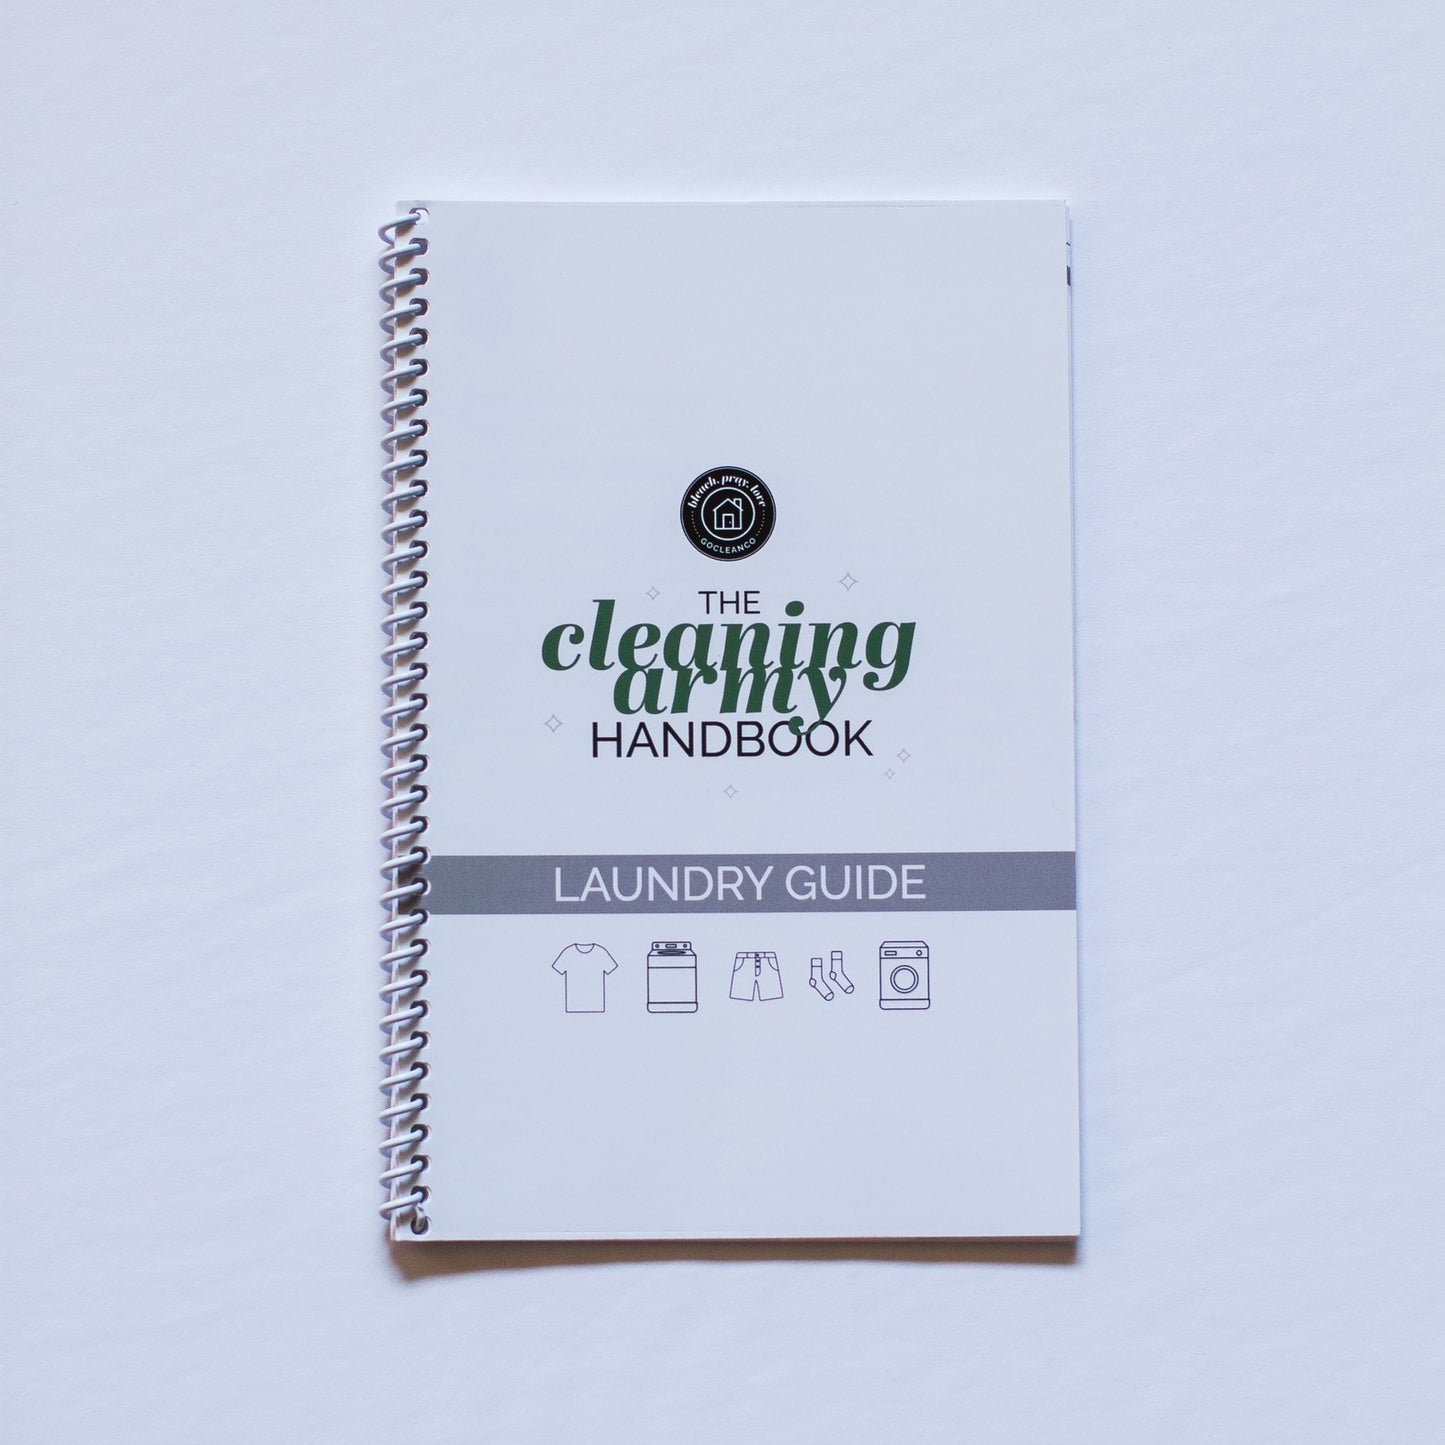 Bundles - 2024 Cleaning Army Calendar + Laundry Guide (Hard Copies)